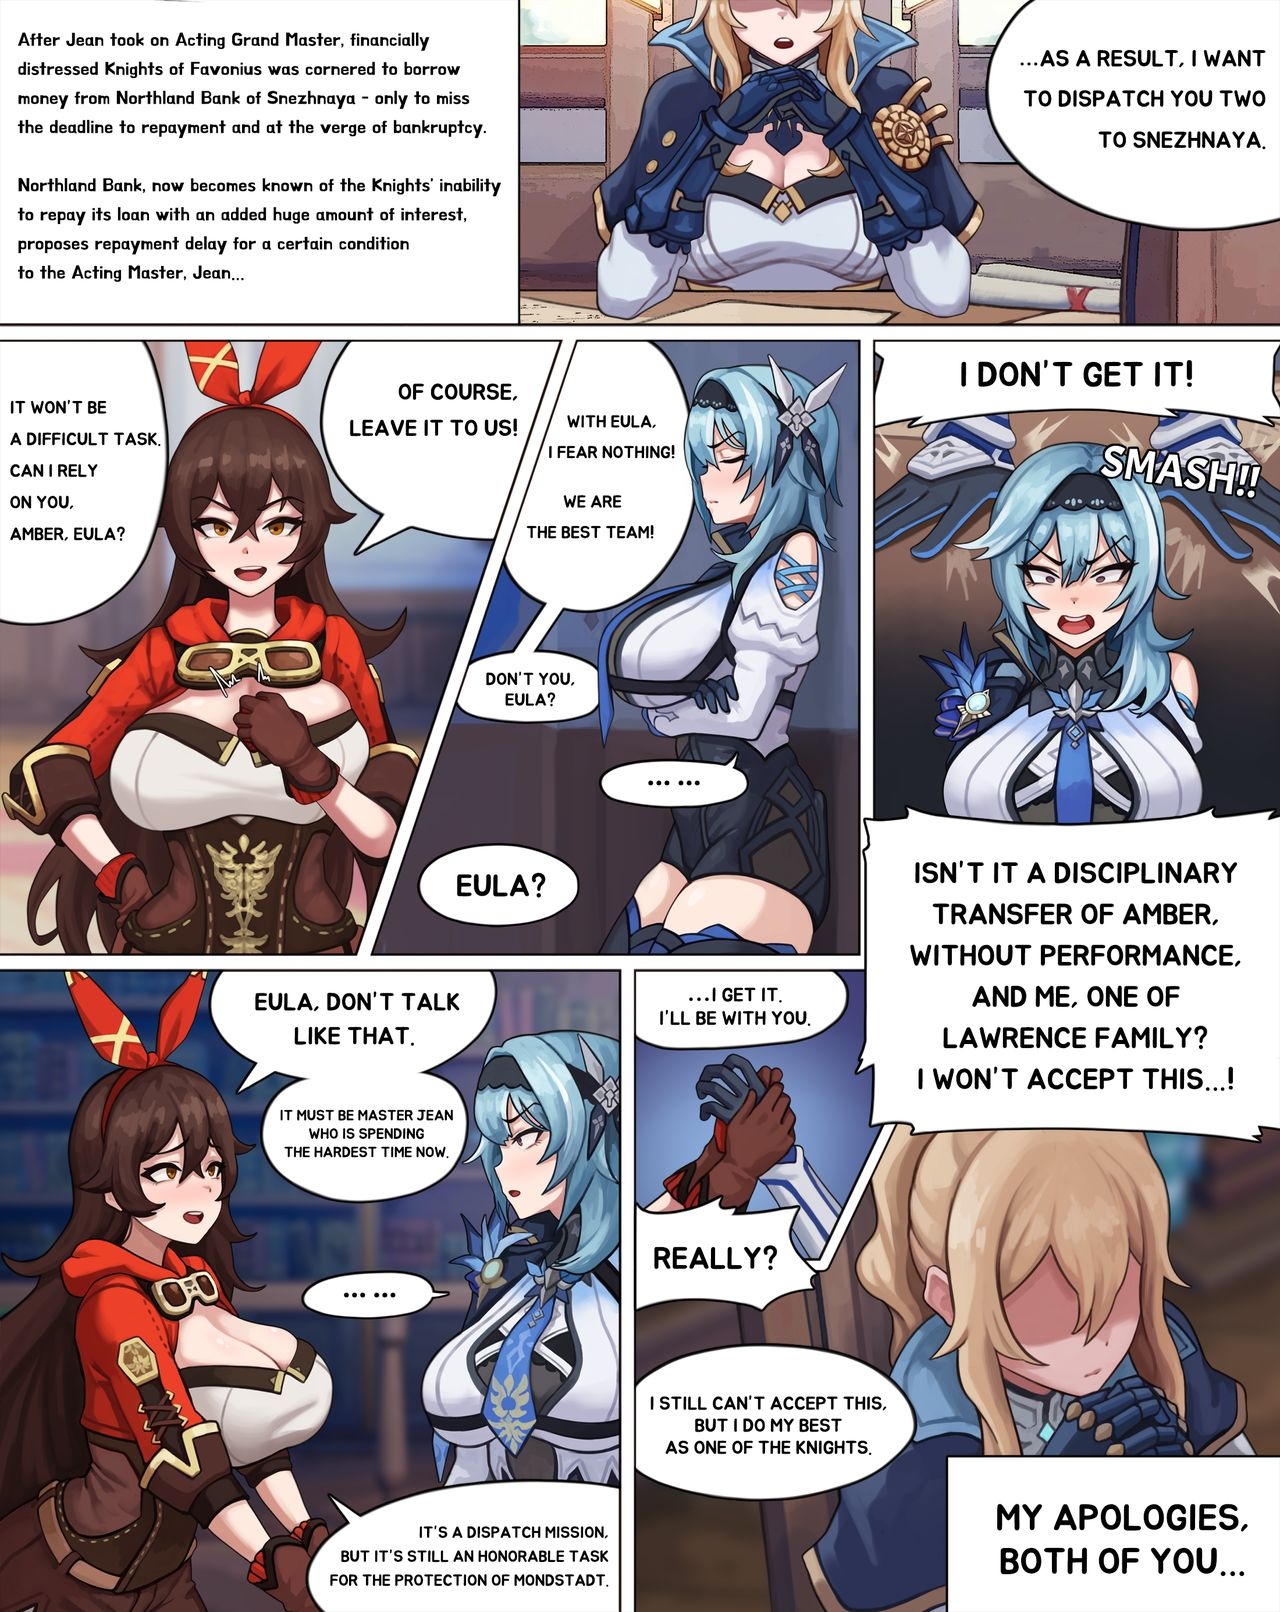 [PoPer] Sexual Service Mission of Knights of Favonius (Part 1) 1